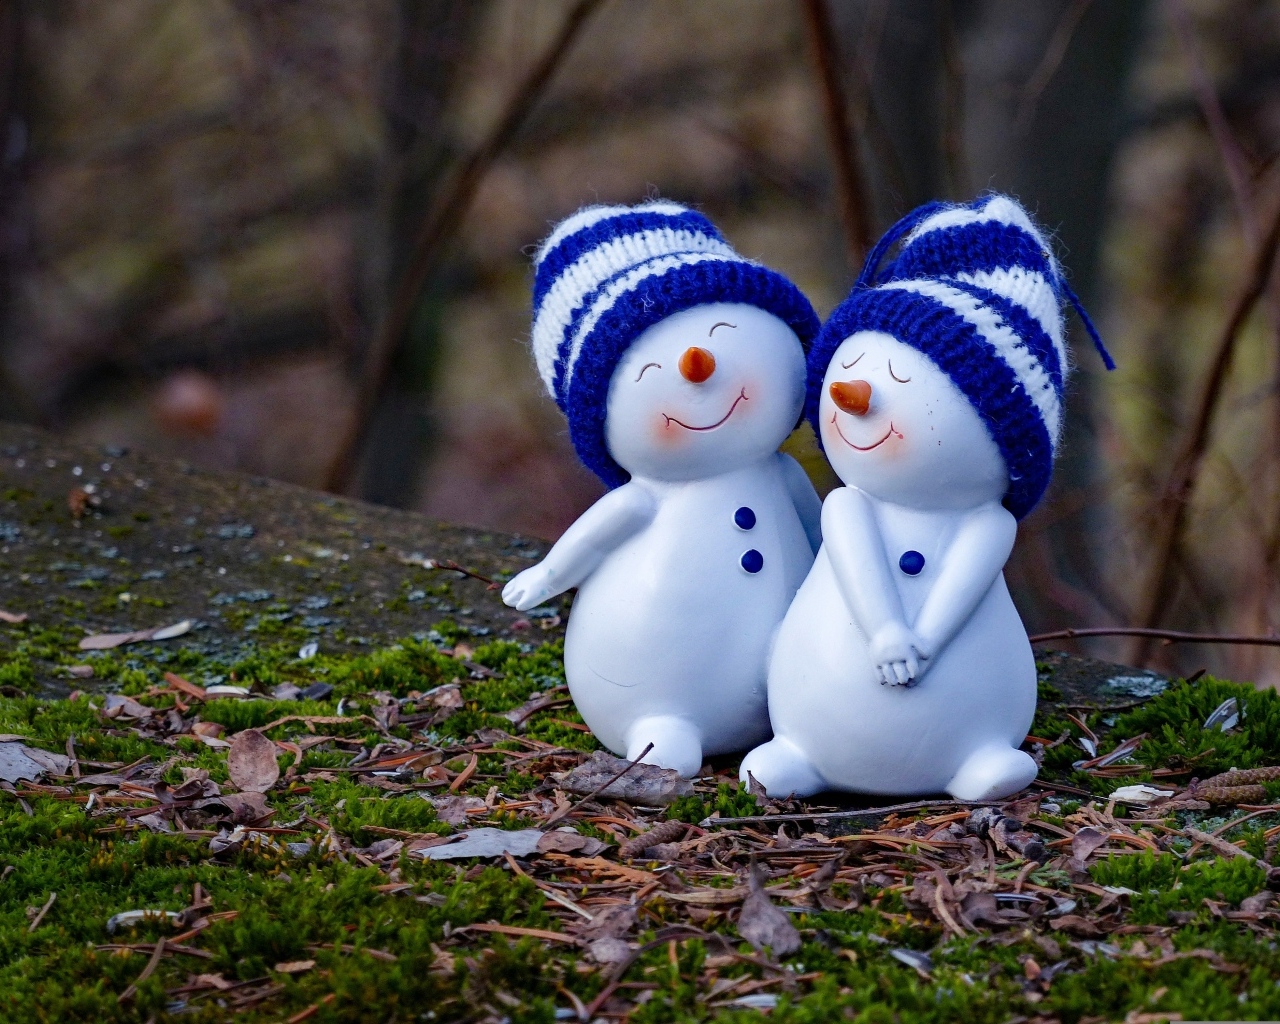 Figurine with snowmen in love on the ground